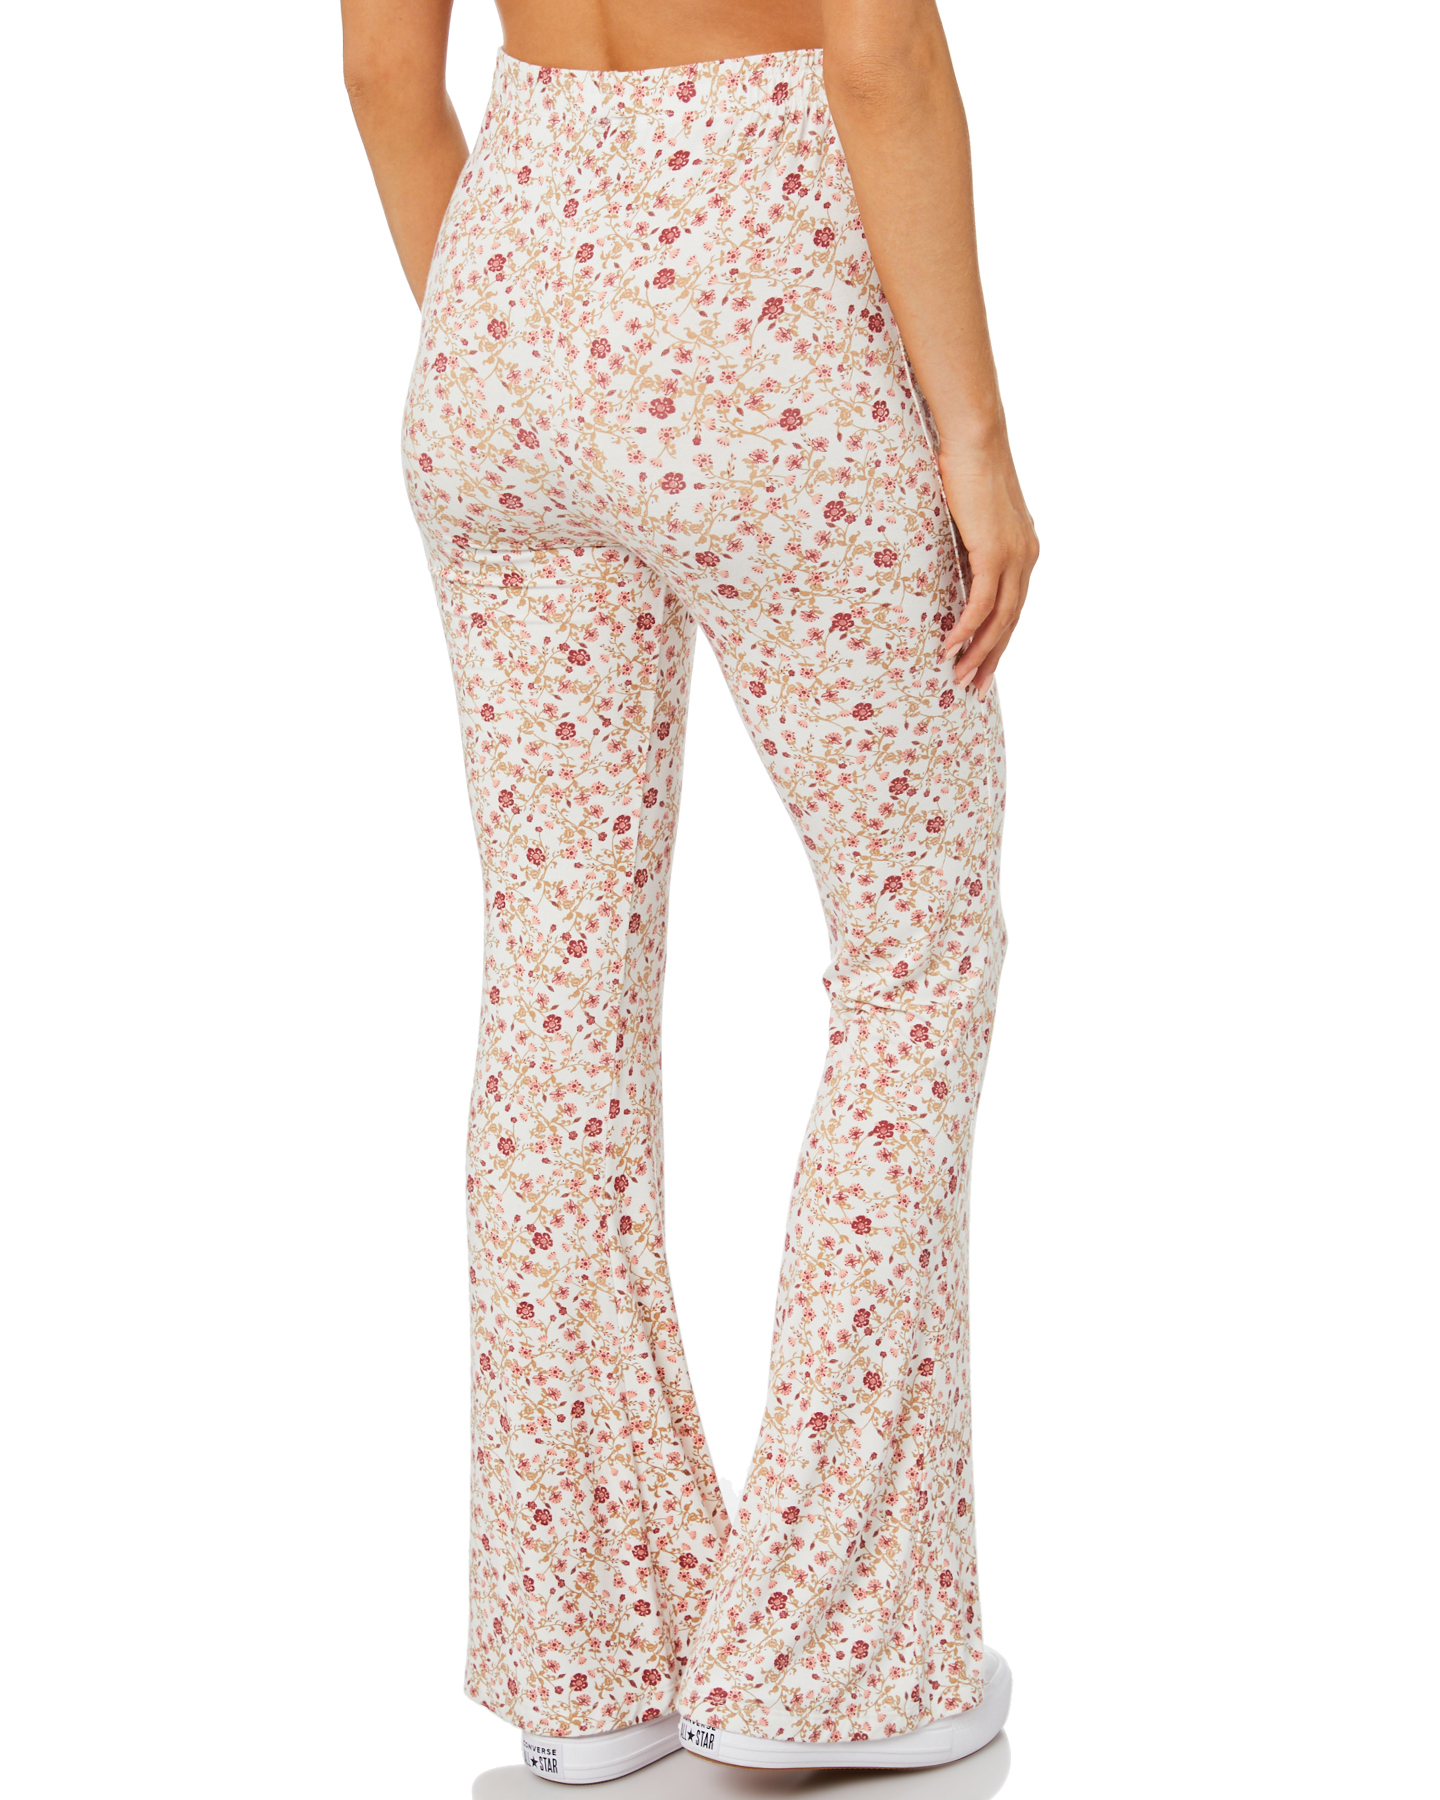 All About Eve Tilly Flare Pant - White Print | SurfStitch